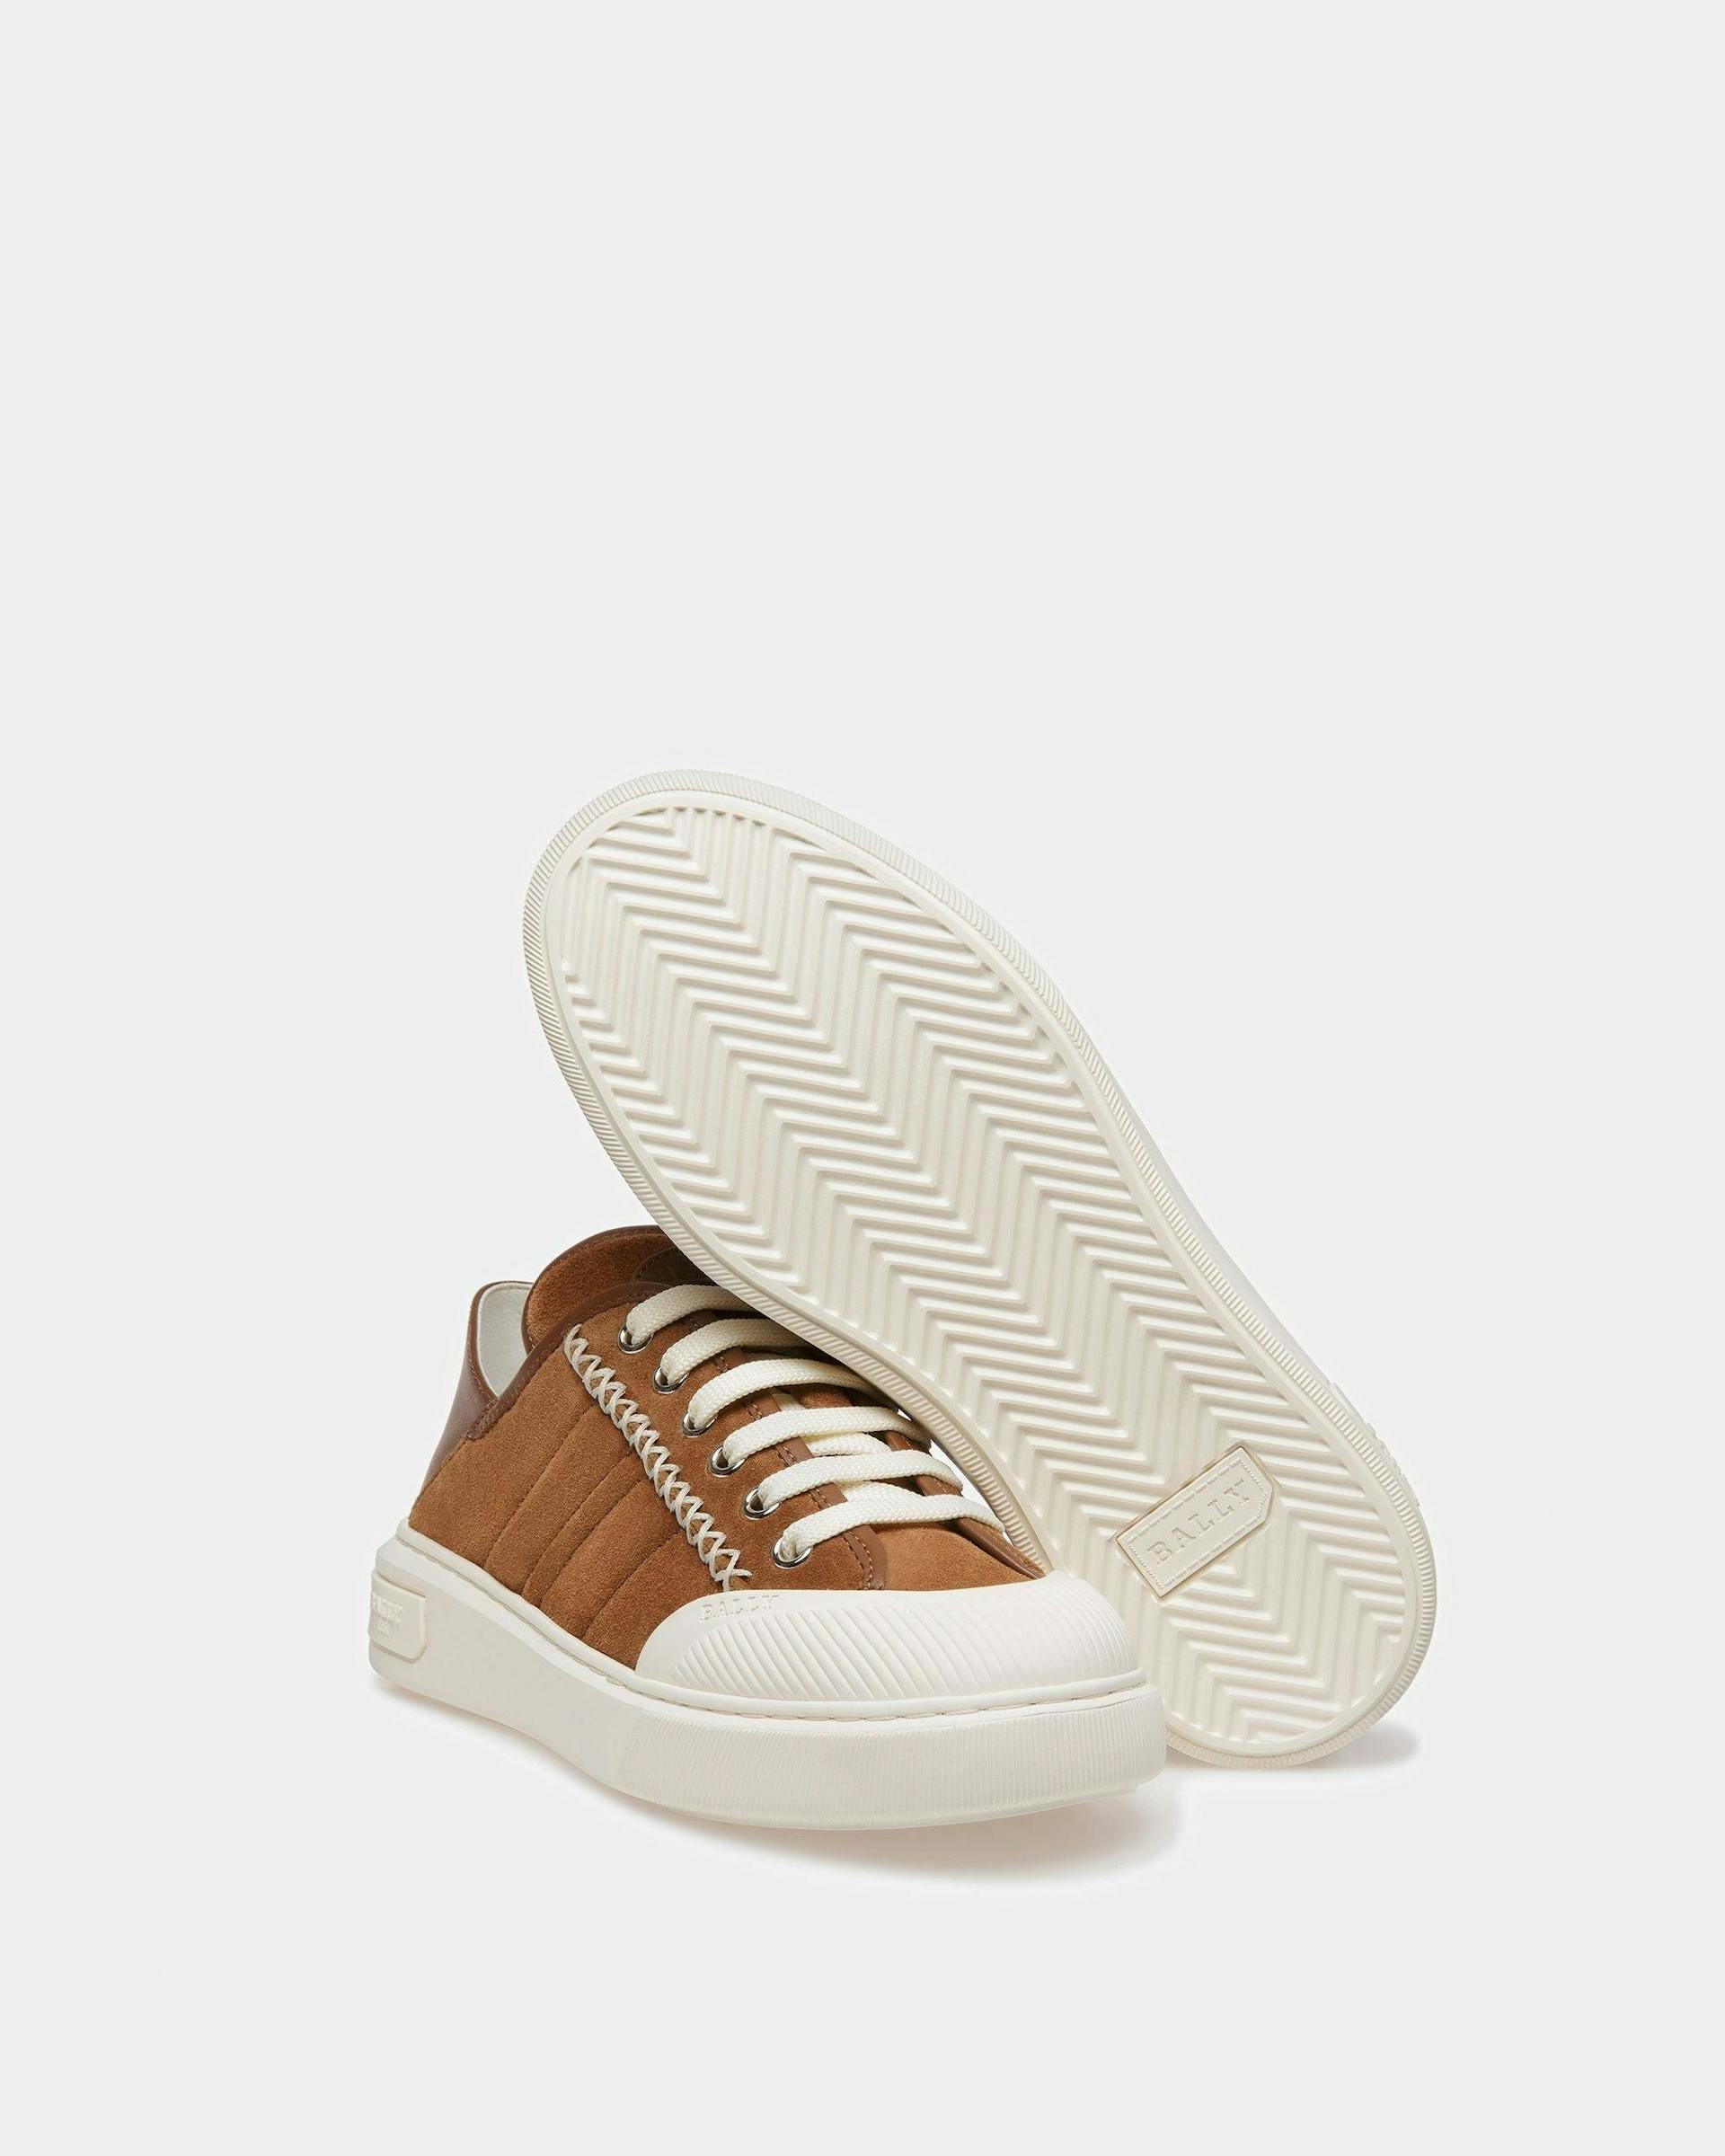 Marily Suede Sneakers In Brown - Women's - Bally - 05